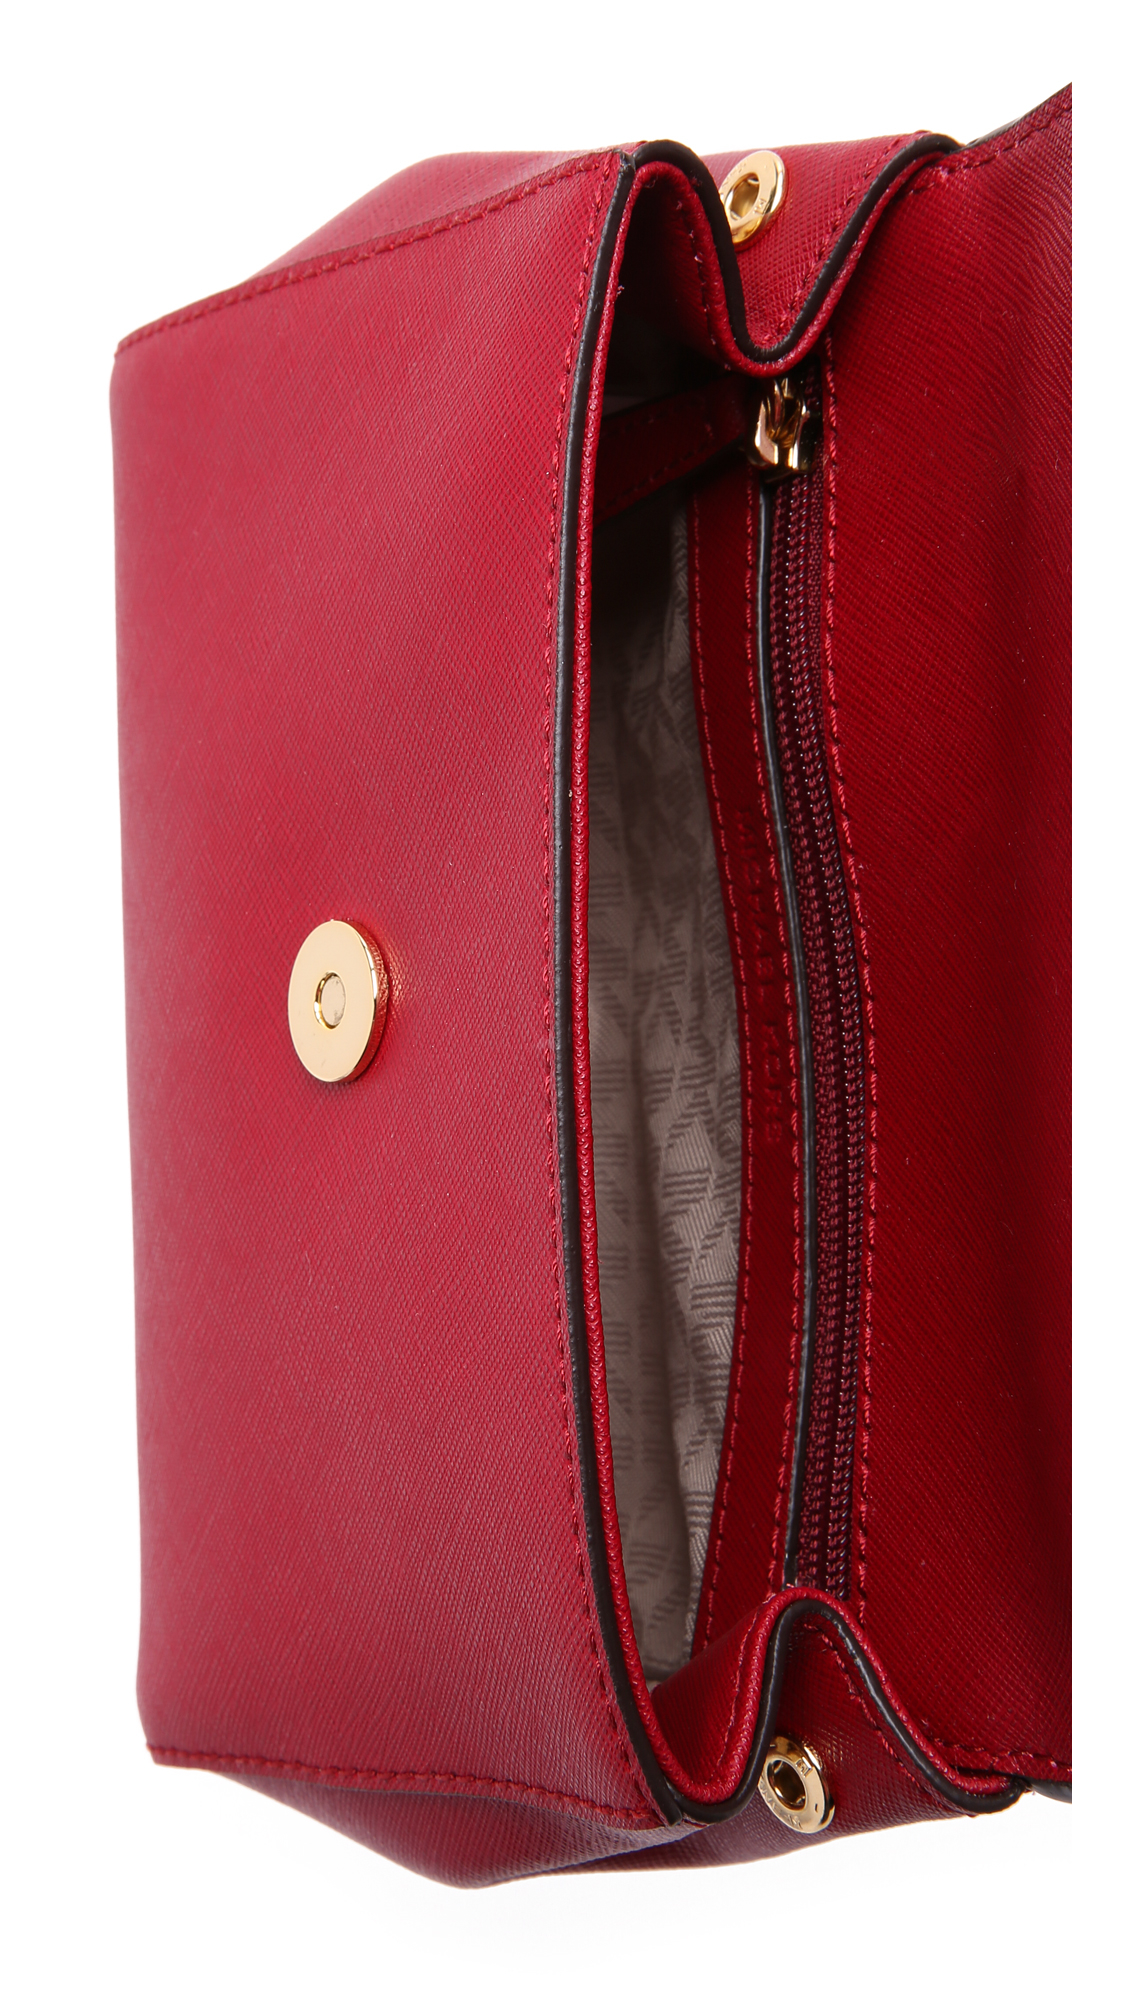 Lyst - MICHAEL Michael Kors Ava Extra Small Cross Body Bag - Cherry in Red